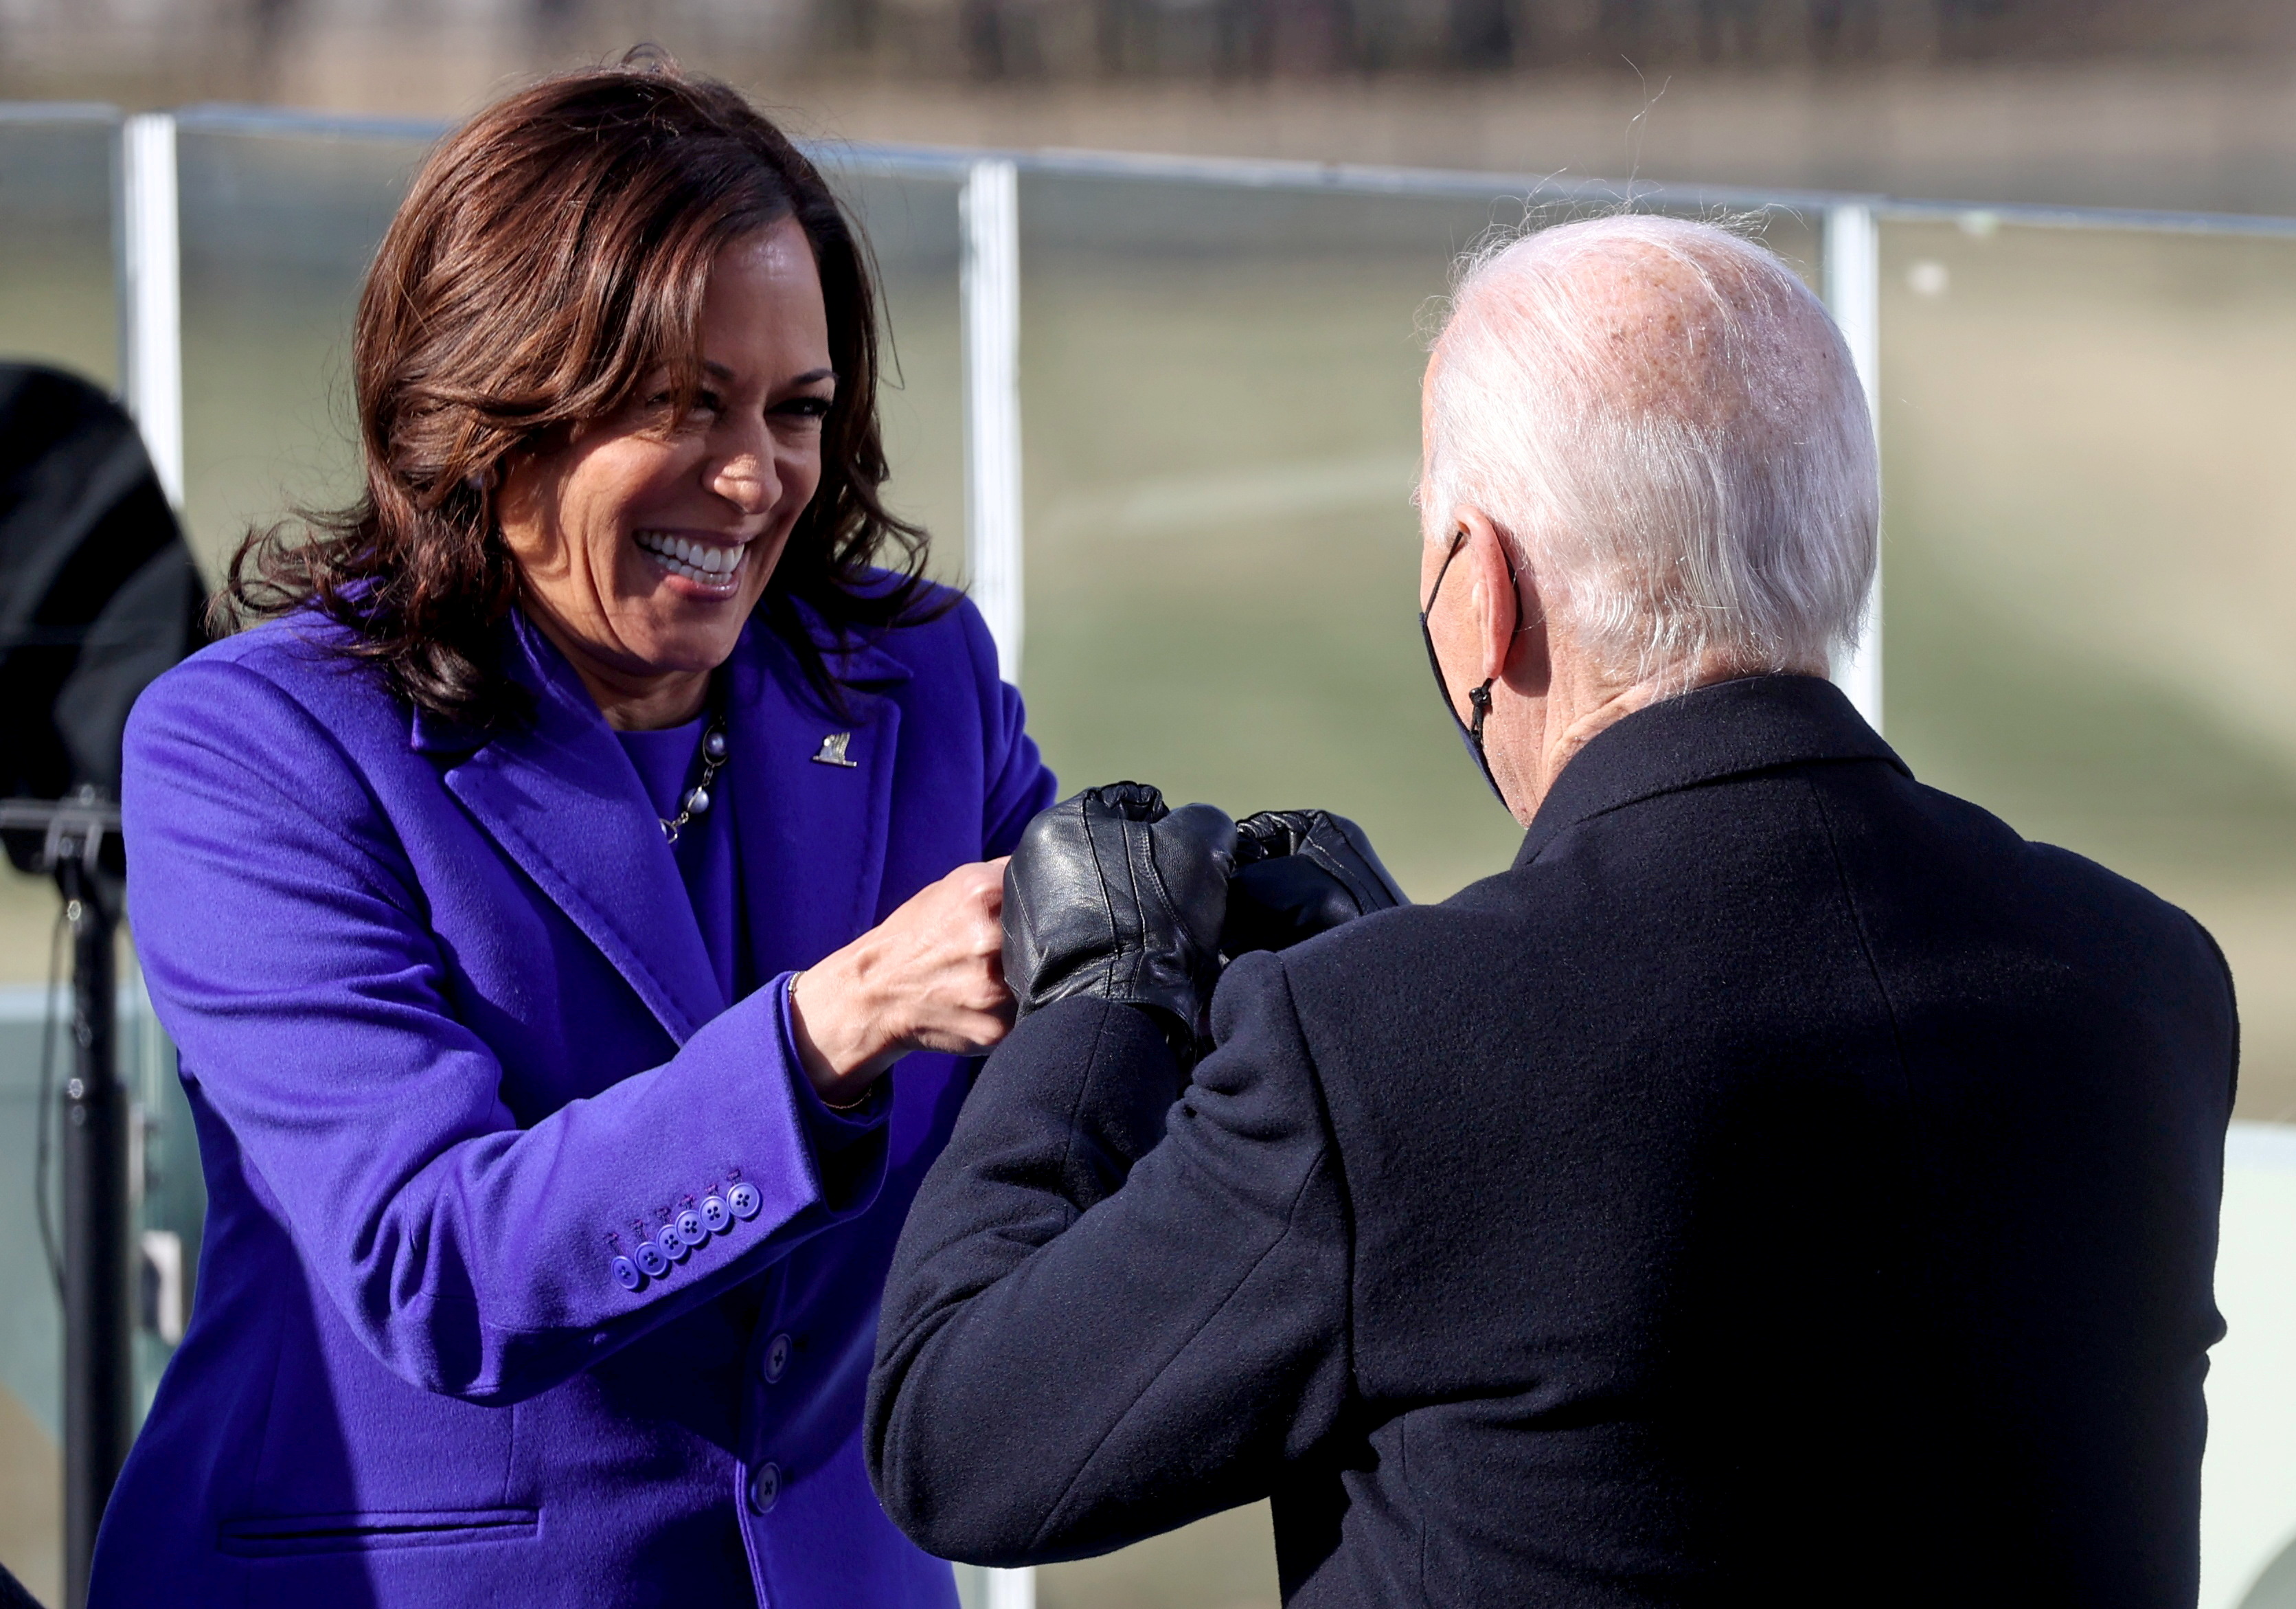 Kamala Harris bumps fists with Joe Biden after being sworn in as Vice President of the United States during the inauguration on the West Front of the U.S. Capitol in Washington, U.S., January 20, 2021. REUTERS/Jonathan Ernst/Pool     TPX IMAGES OF THE DAY